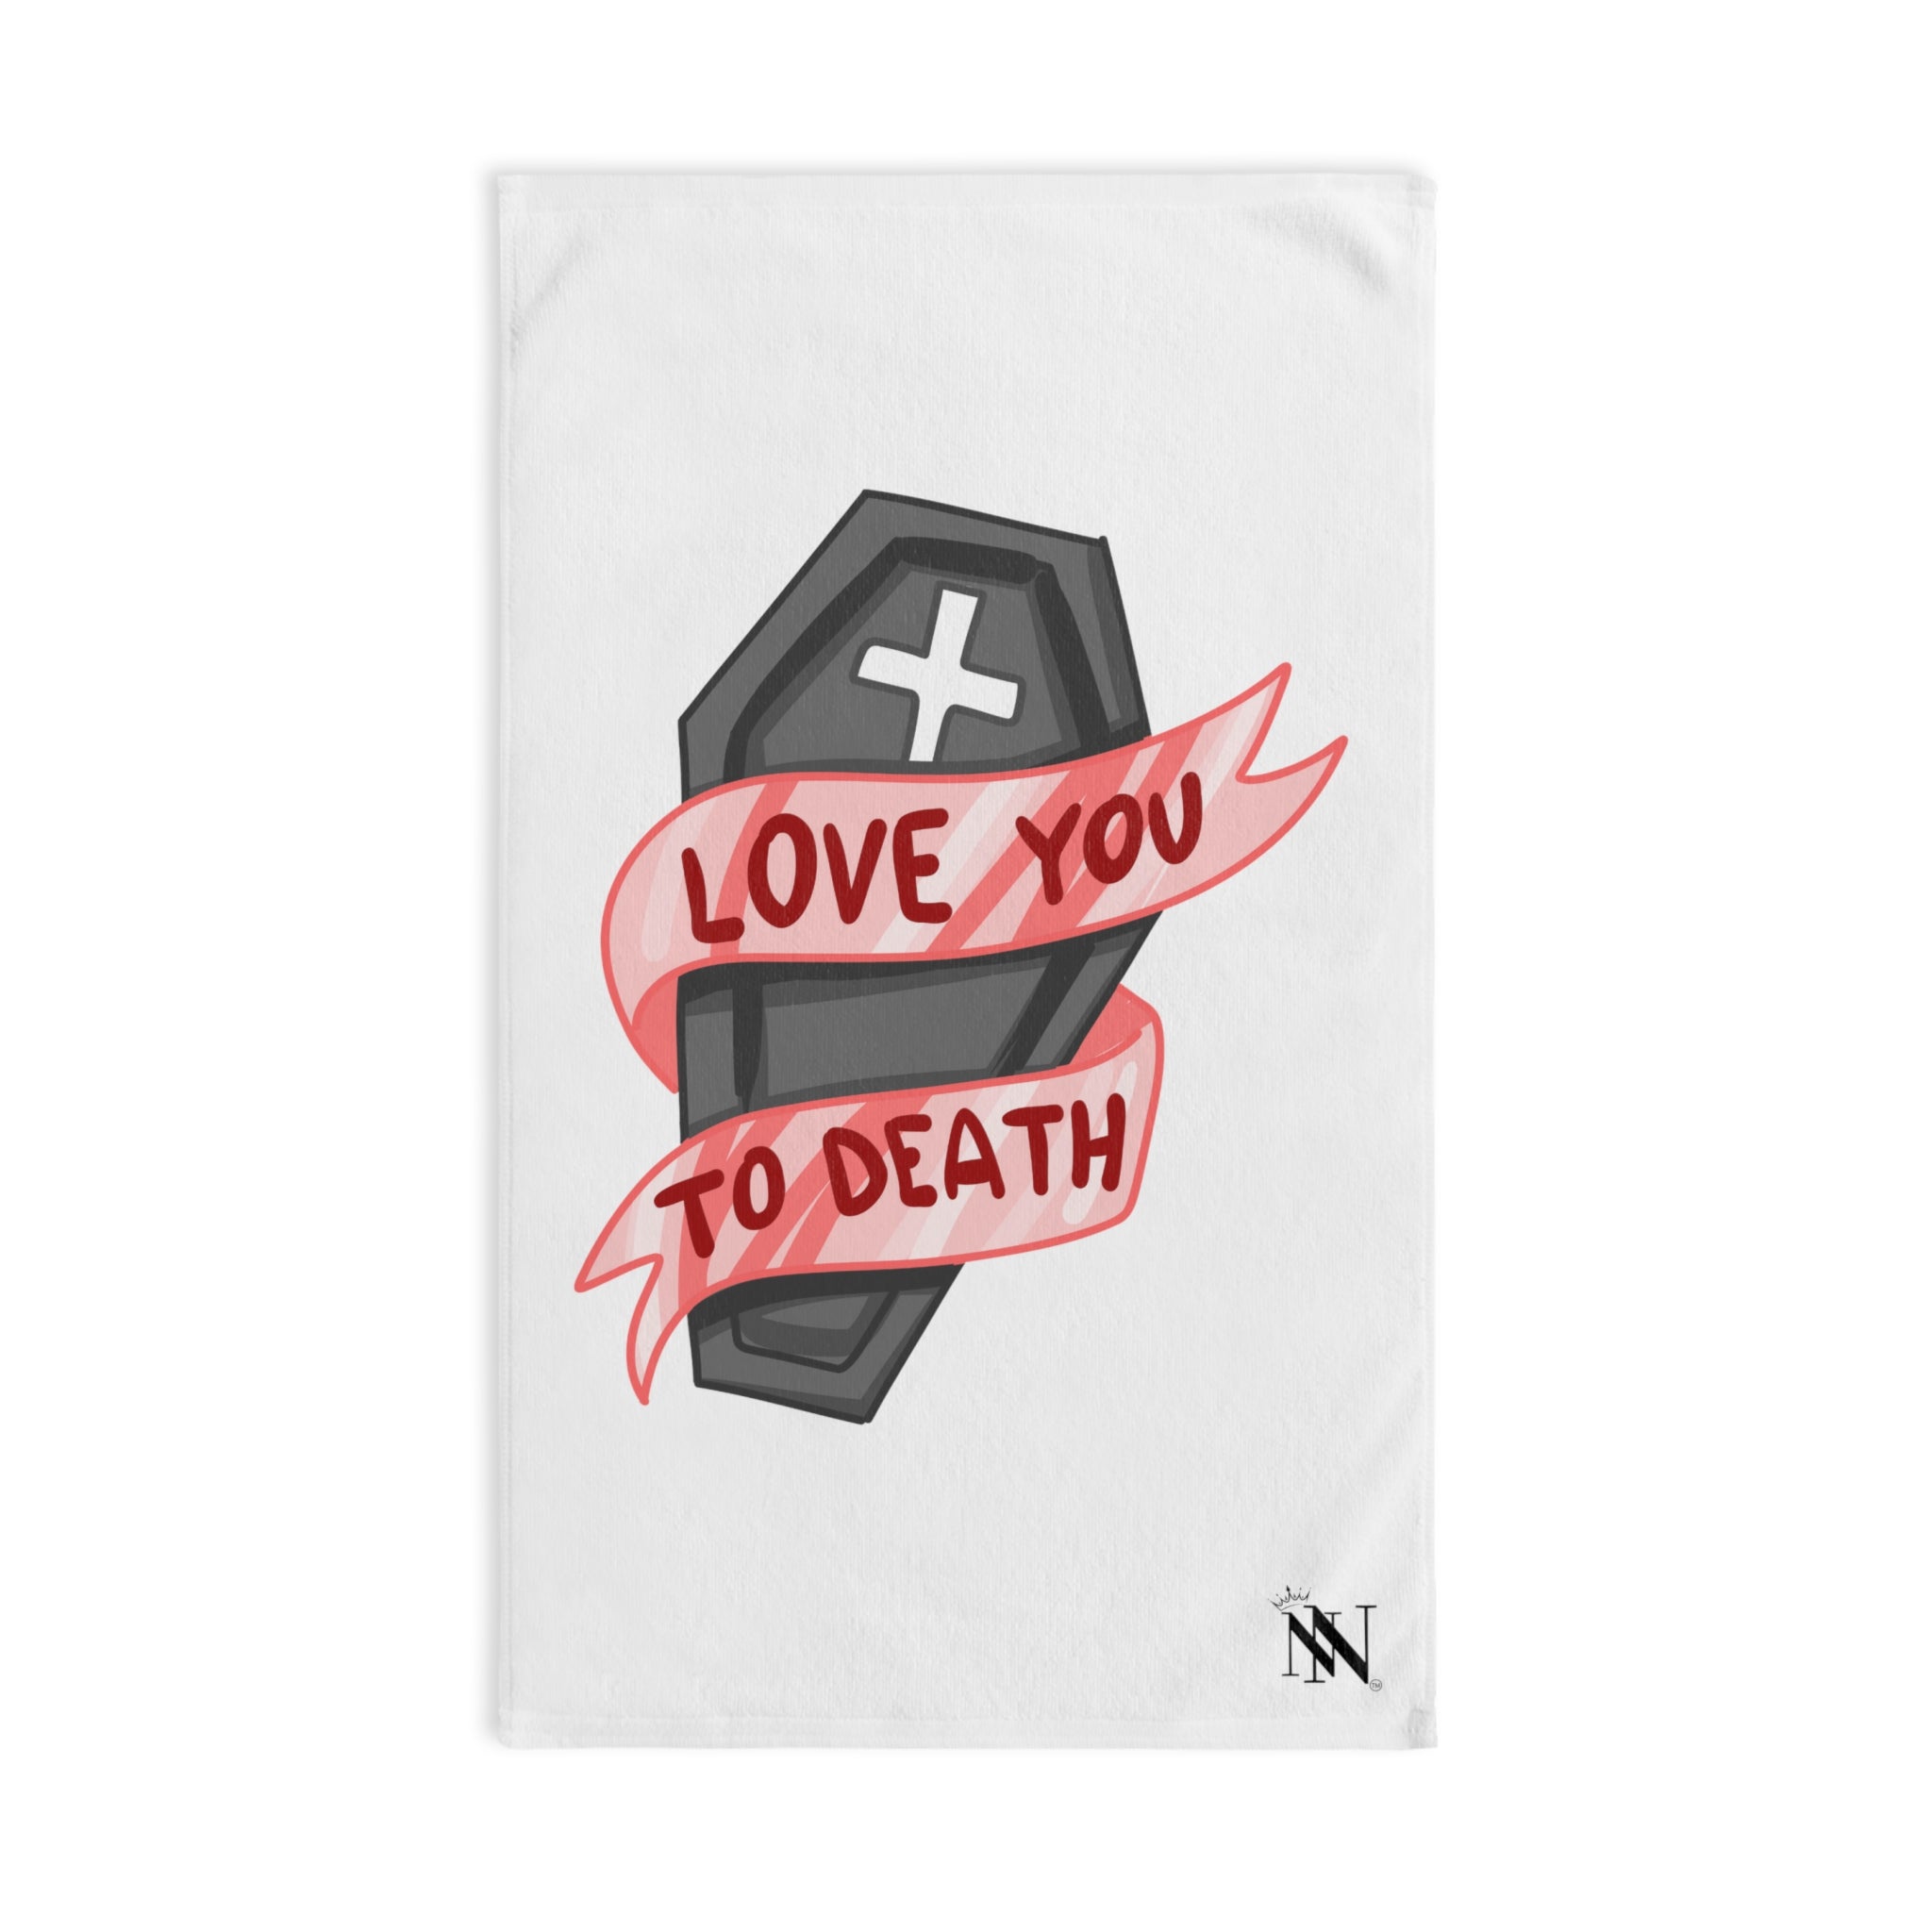 Love You Death | Gifts for Boyfriend, Funny Towel Romantic Gift for Wedding Couple Fiance First Year Anniversary Valentines, Party Gag Gifts, Joke Humor Cloth for Husband Men BF NECTAR NAPKINS